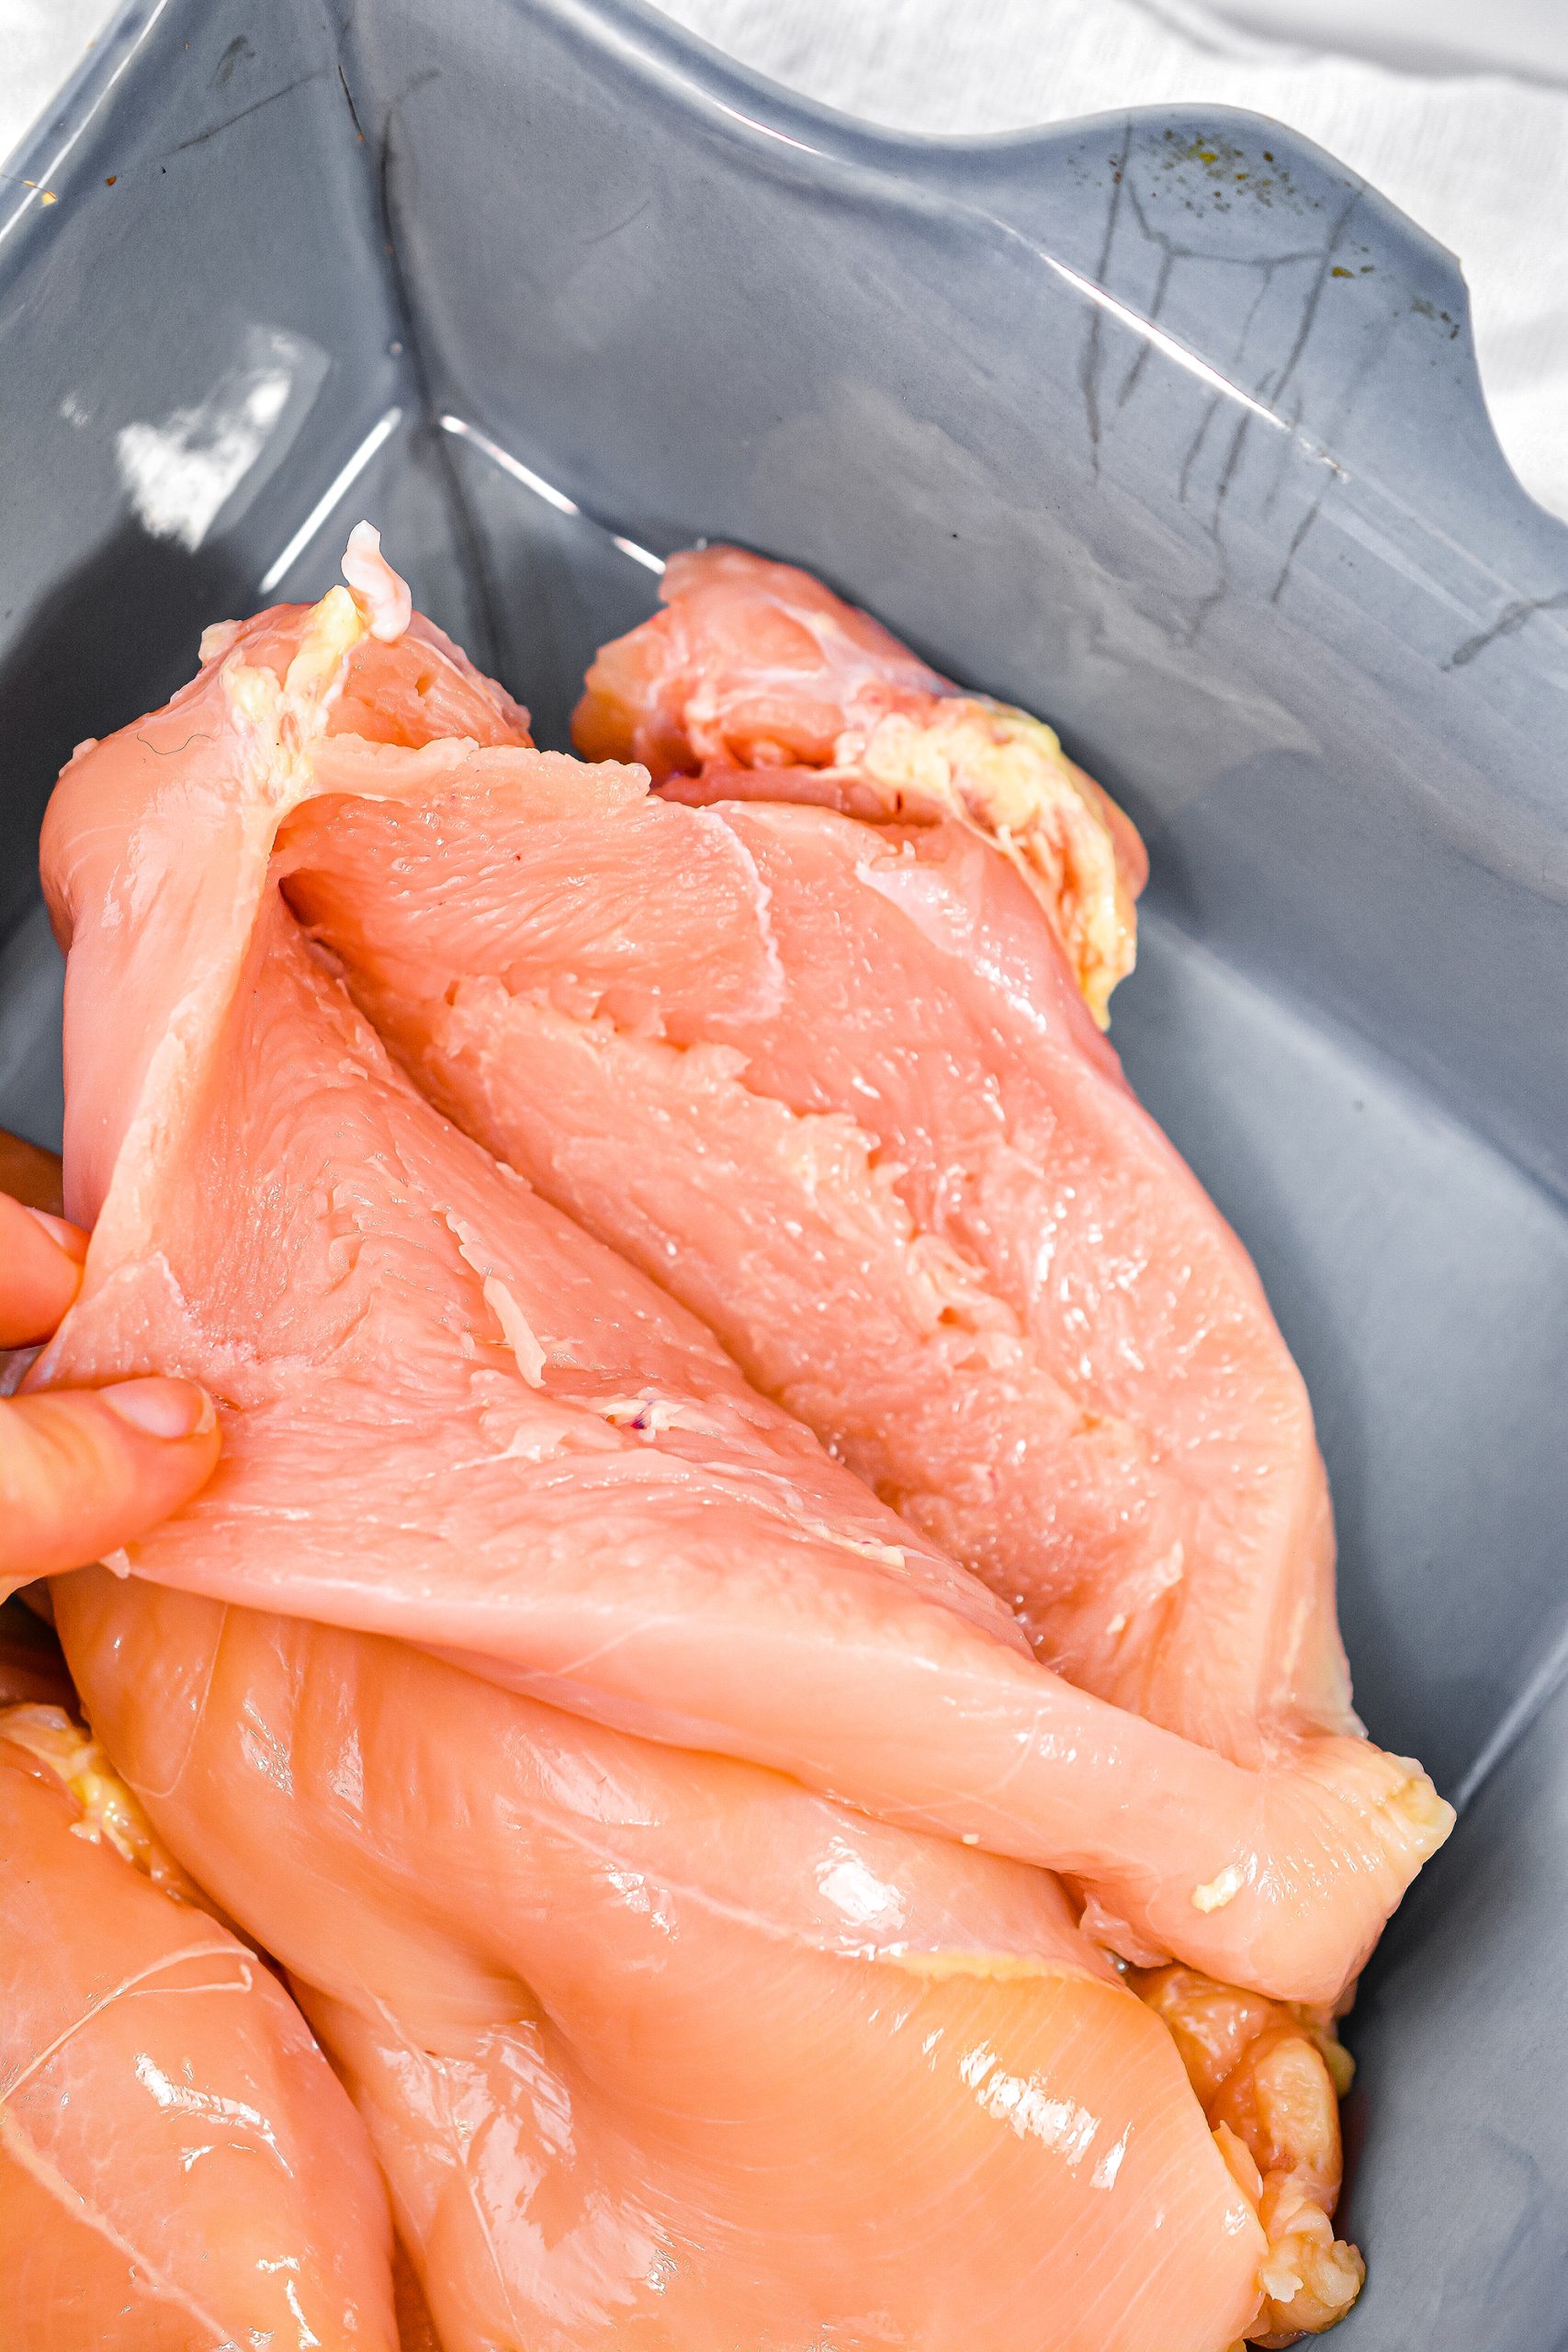 Cut a slit in the side of each chicken breast so that it forms a pocket that you can stuff.